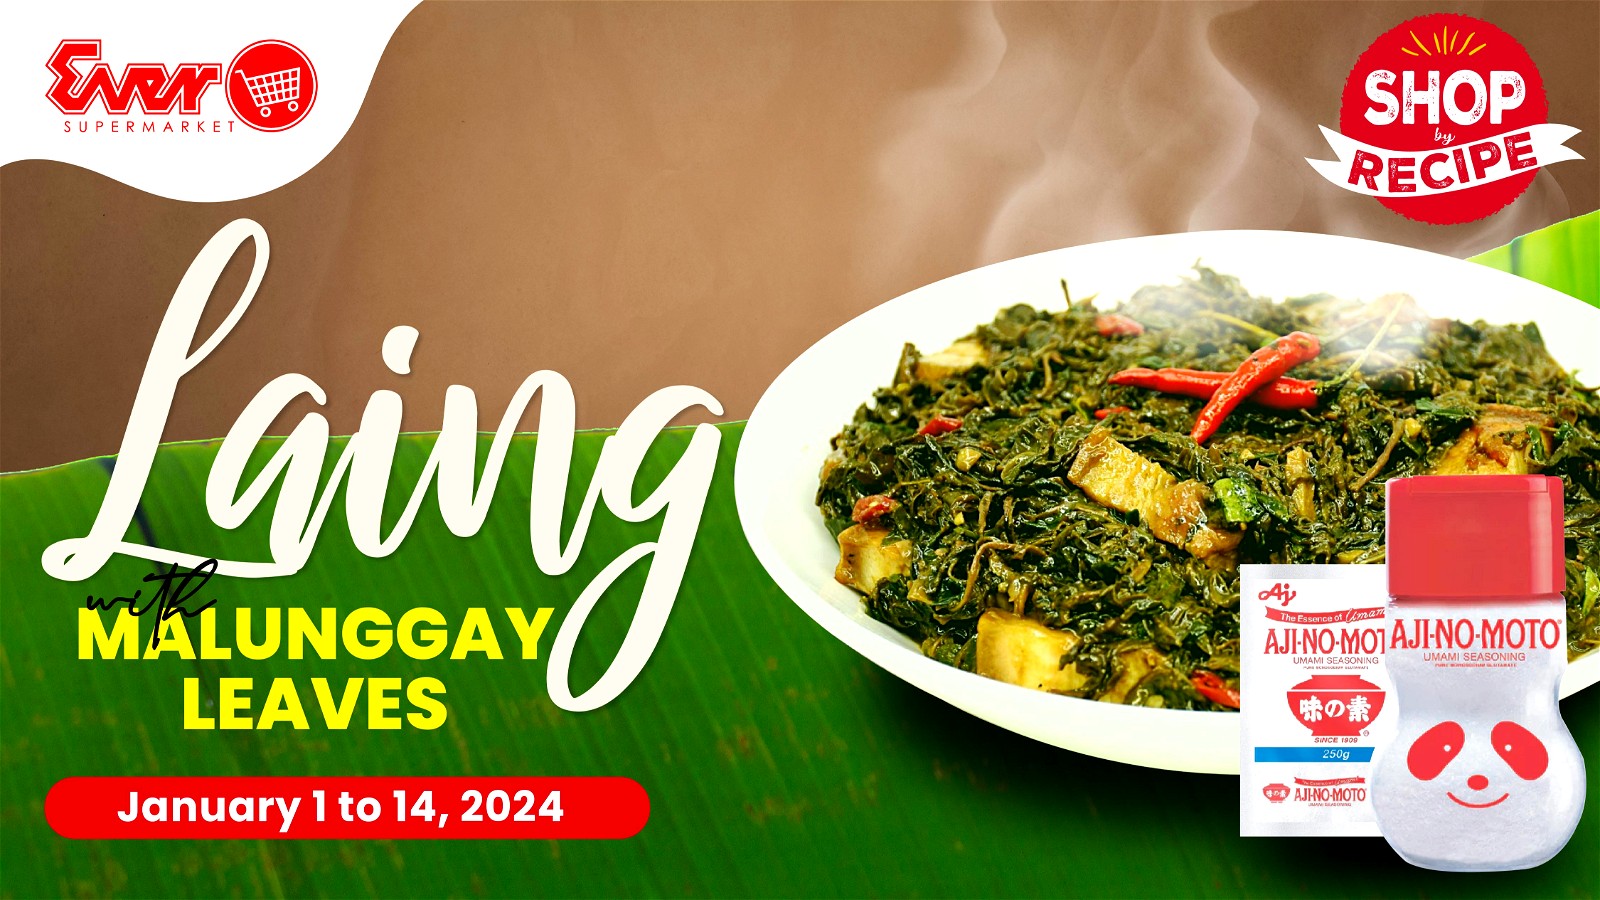 Image of Laing With Malunggay Leaves